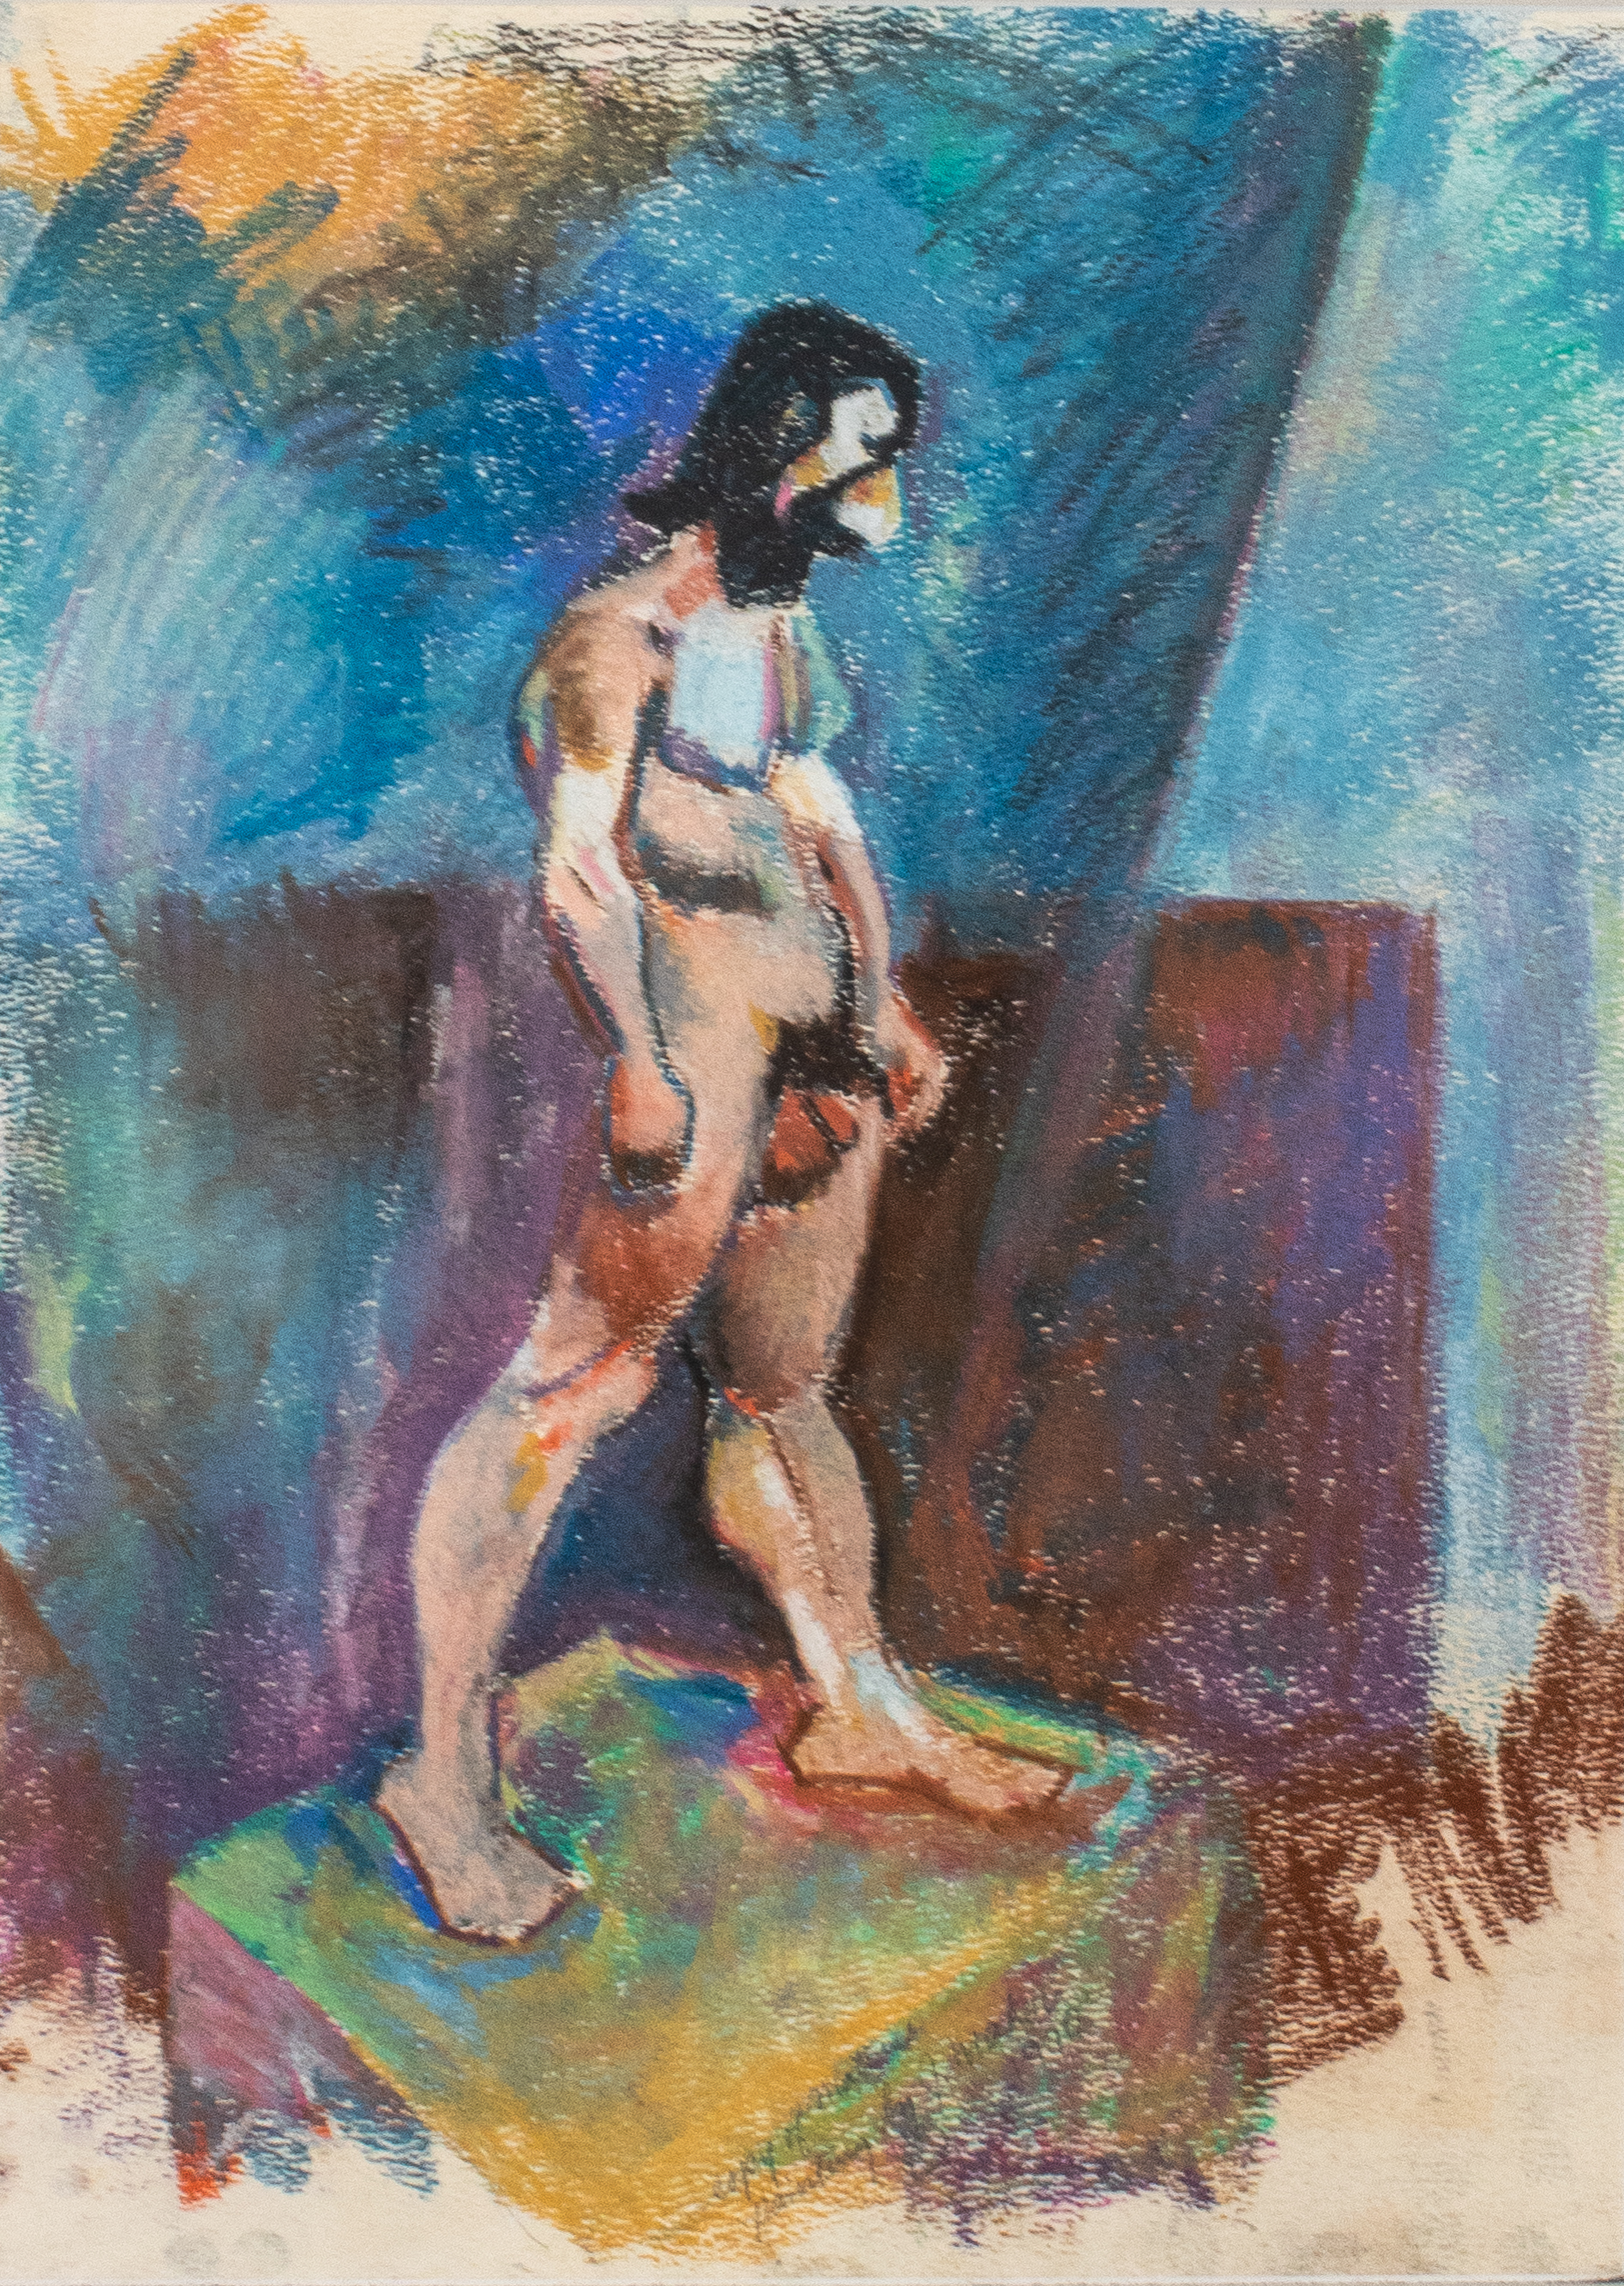 MAHER MALE MODEL PASTEL ON PAPER 36385d